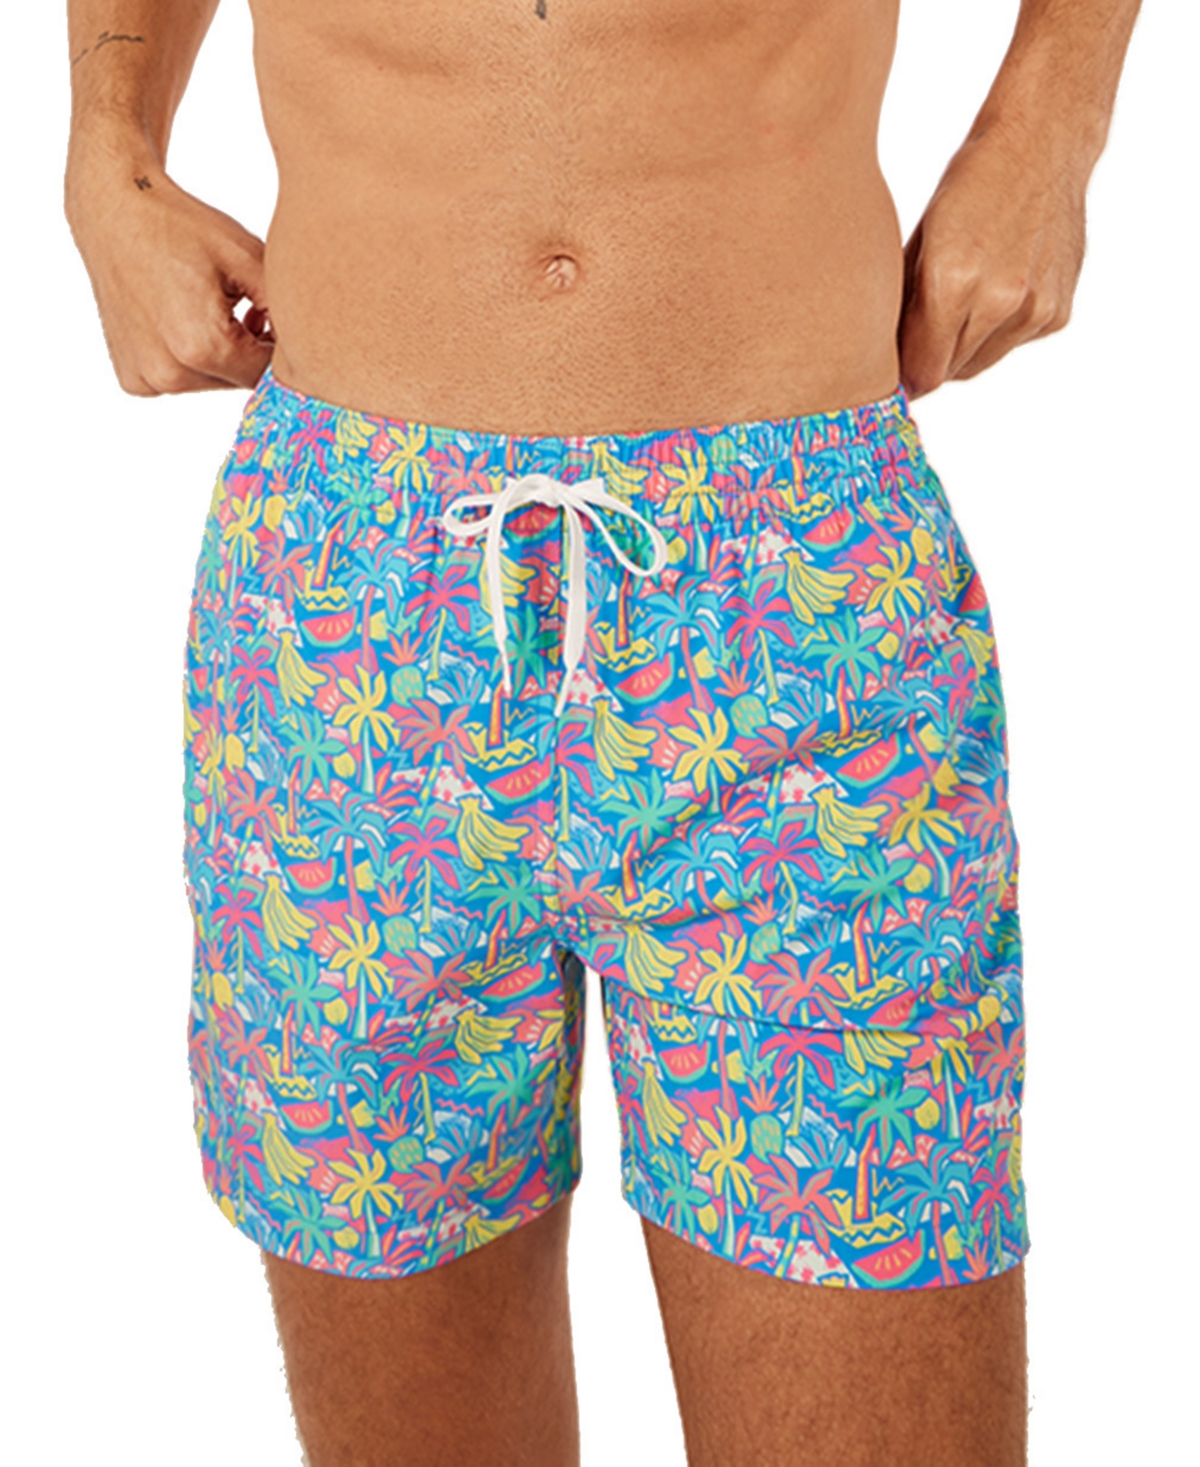 Men's The Tropical Bunches Quick-Dry 5-1/2" Swim Trunks - Bright Blue